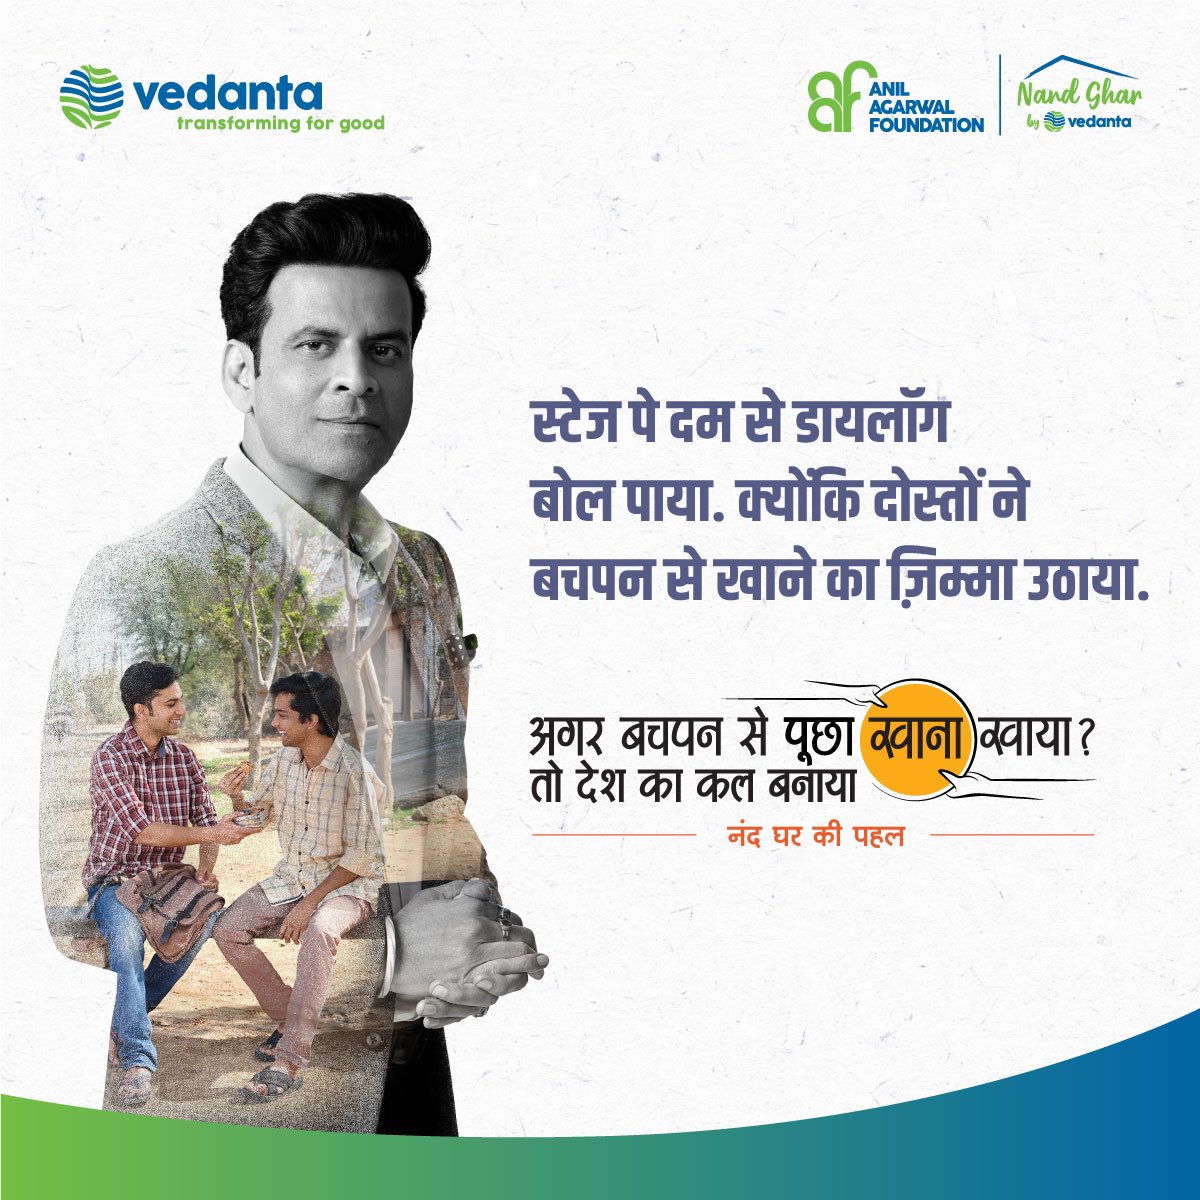 #KhaanaKhaayaKya, a simple question, gave @BajpayeeManoj the strength to fulfill his aspirations. #NandGhar is asking the same question to children, helping them chase their dreams. Join the movement by visiting nandghar.org. #TransformingForGood #NandGhar